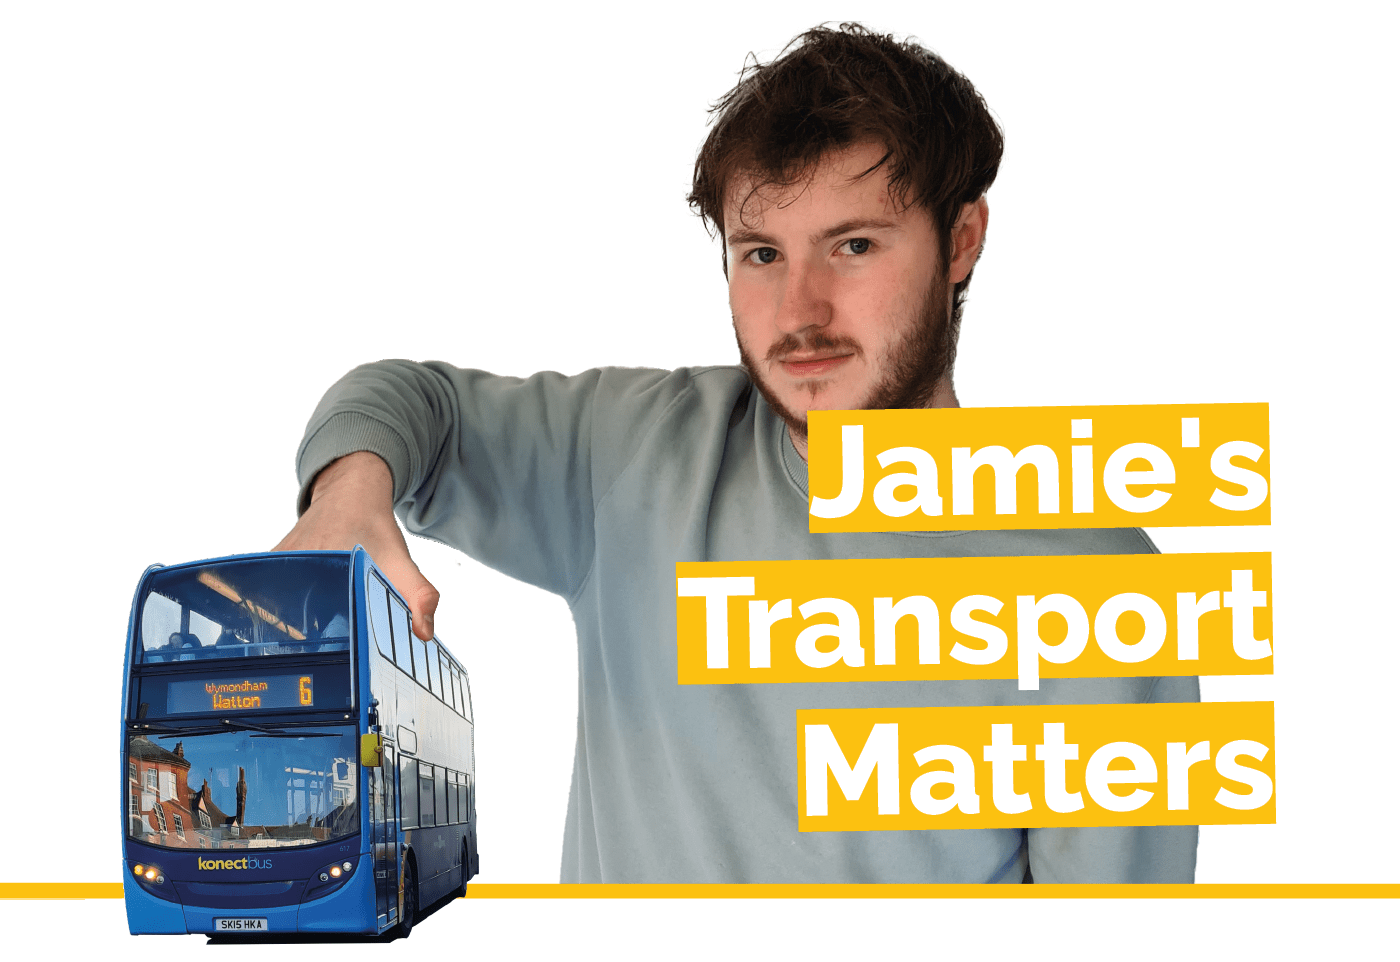 Jamie holding a bus